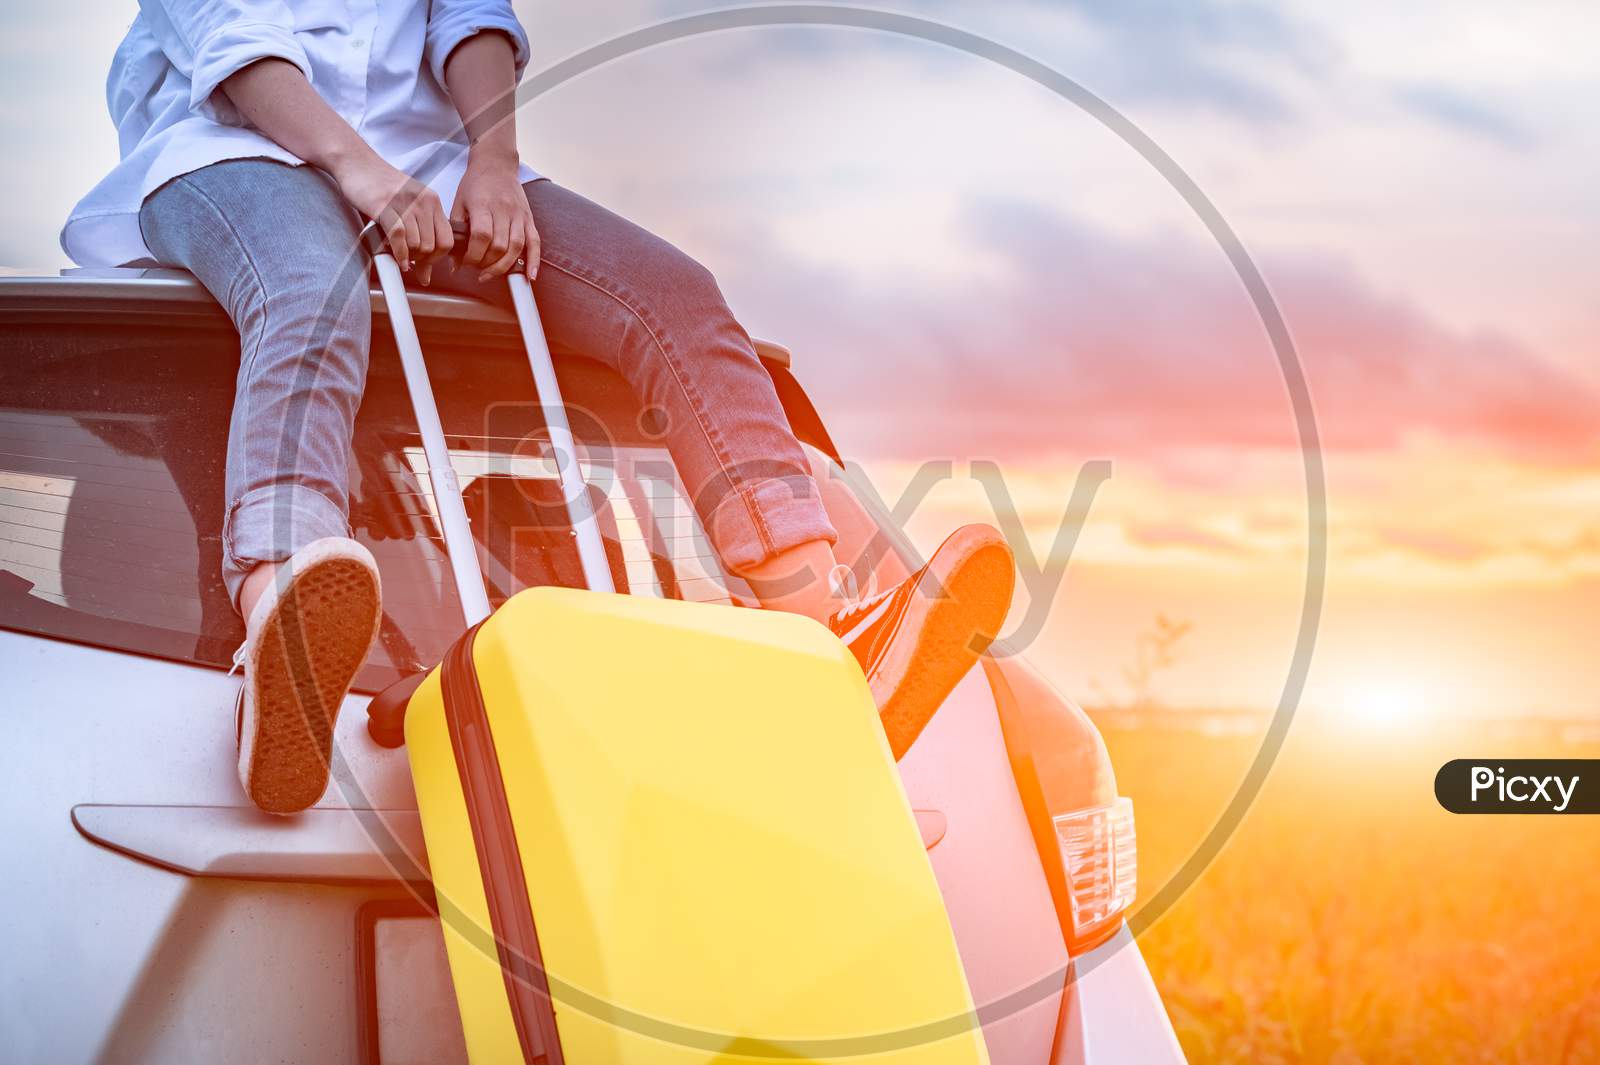 Closeup Of Happy Asian Woman On Top Of Car With Luggage Bag. Girl Sitting On Roof And Looking Sunset Before Evening. People Lifestyle In Long Vacation Trip Concept. Nature And Transportation Vehicle